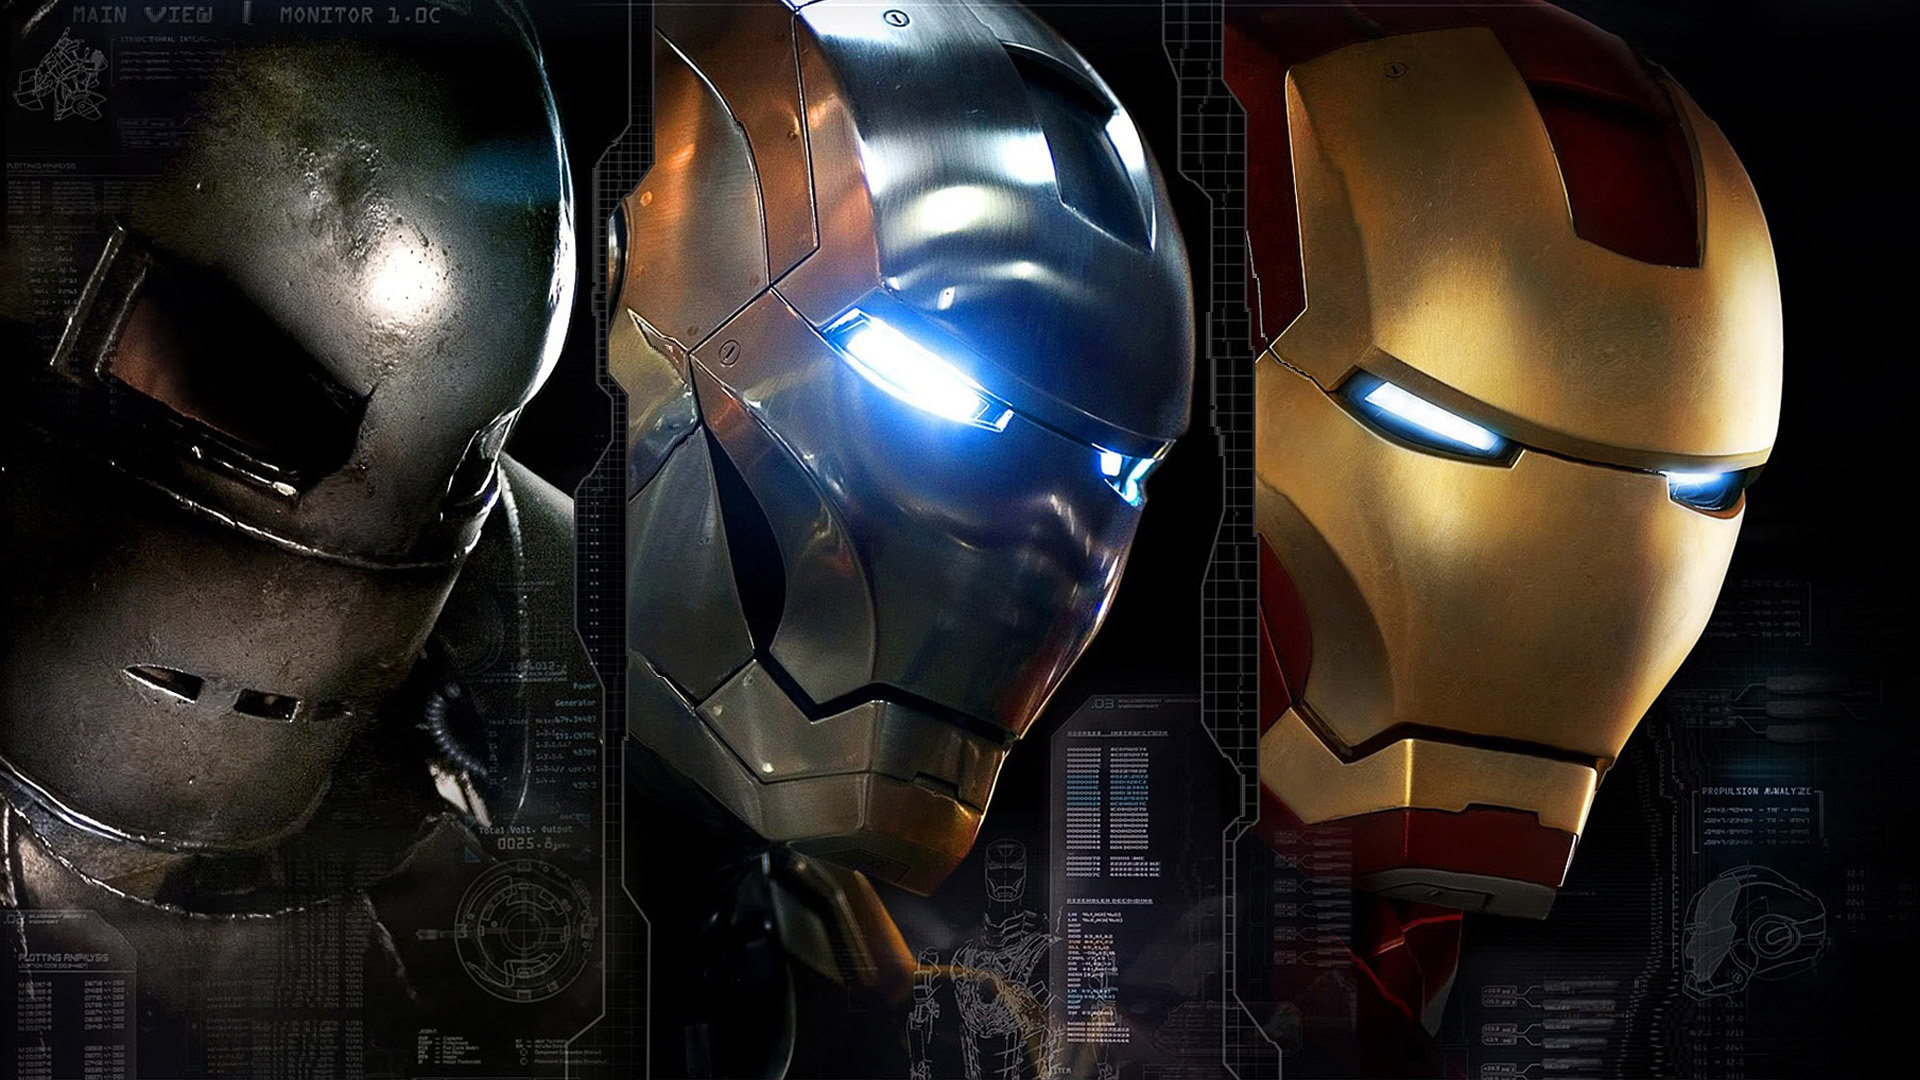 What year was Iron Man released?